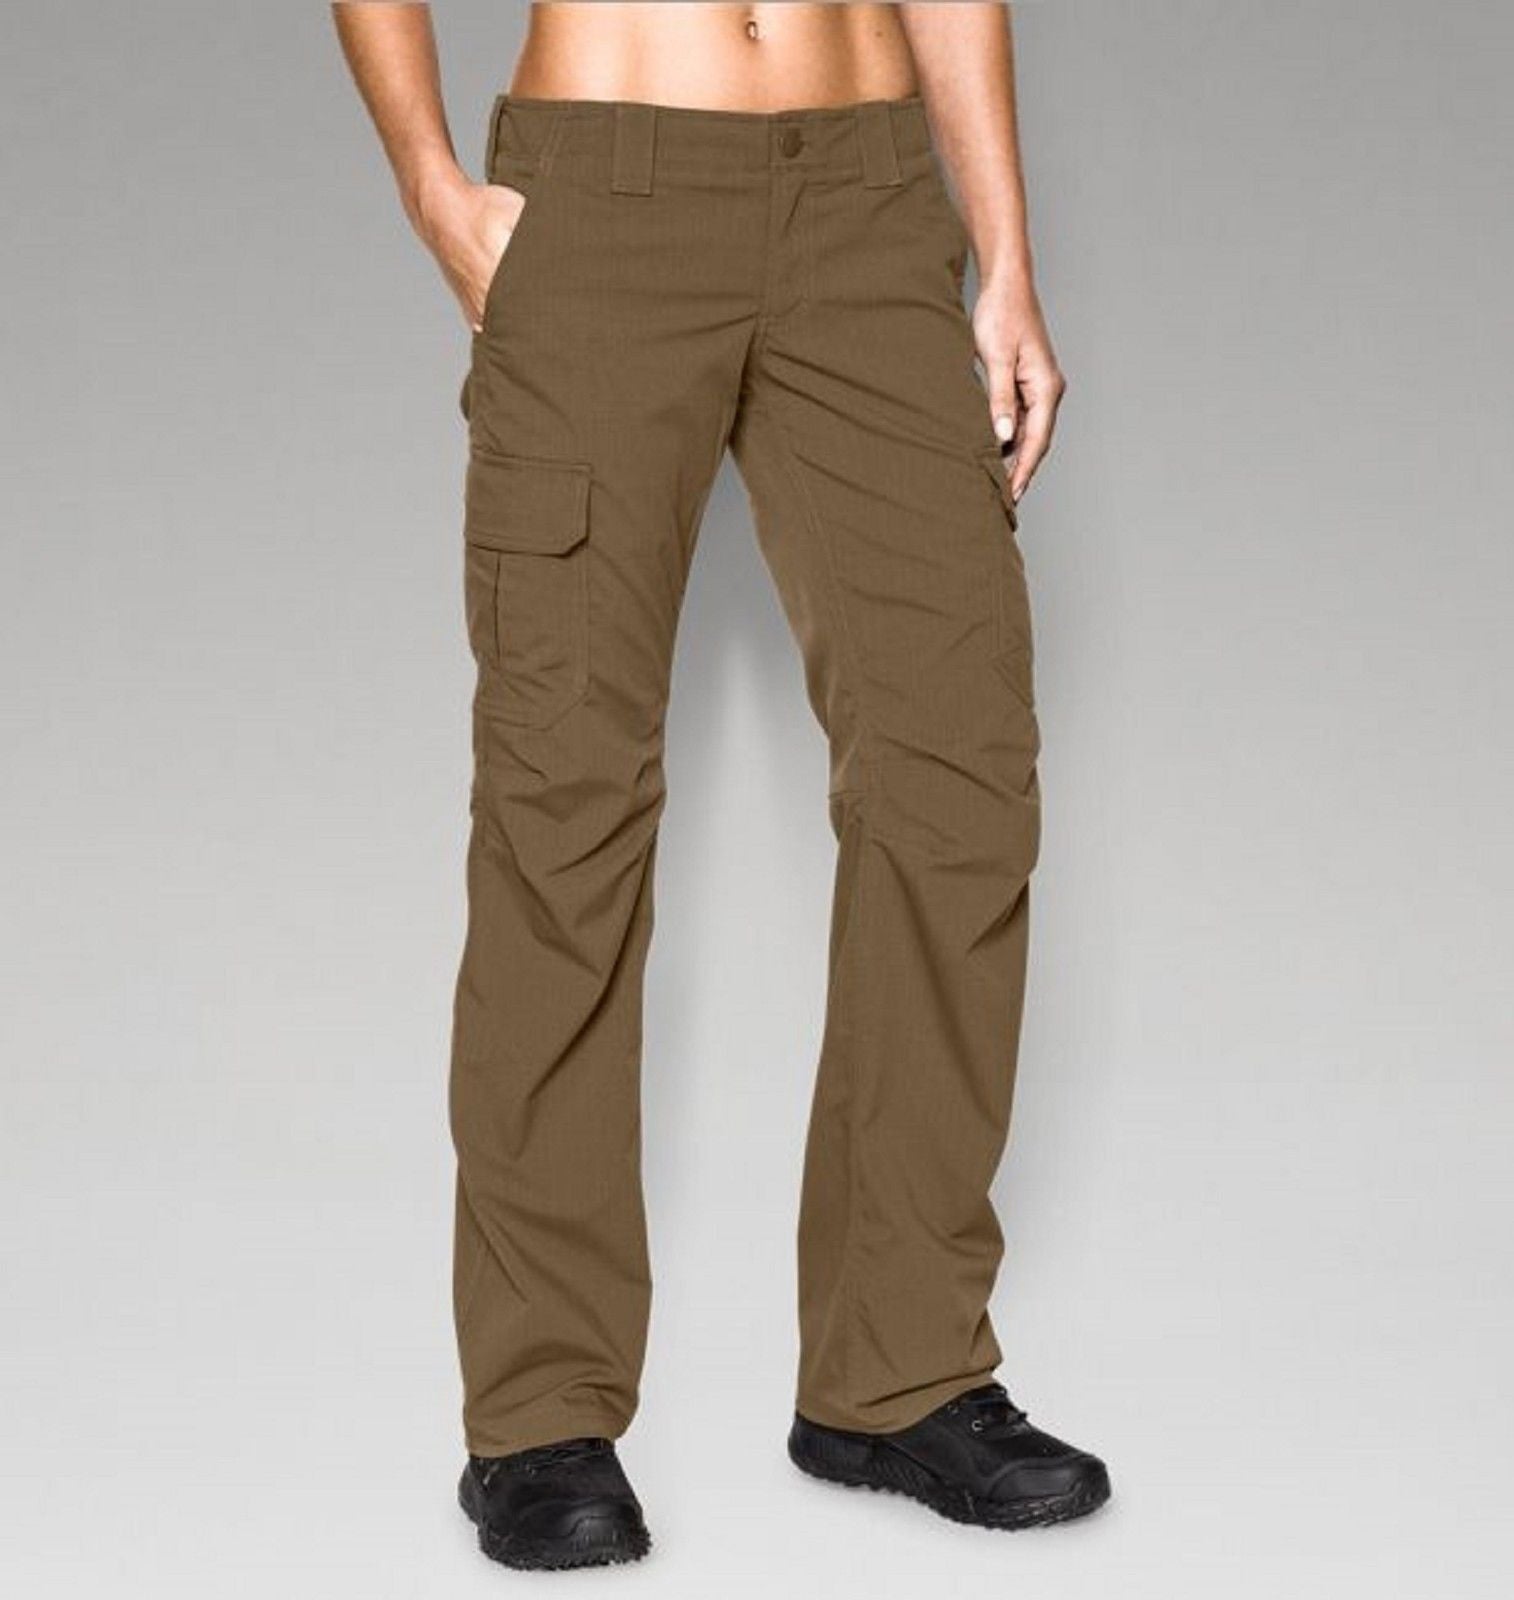 Under Armour Womens Tactical Patrol 